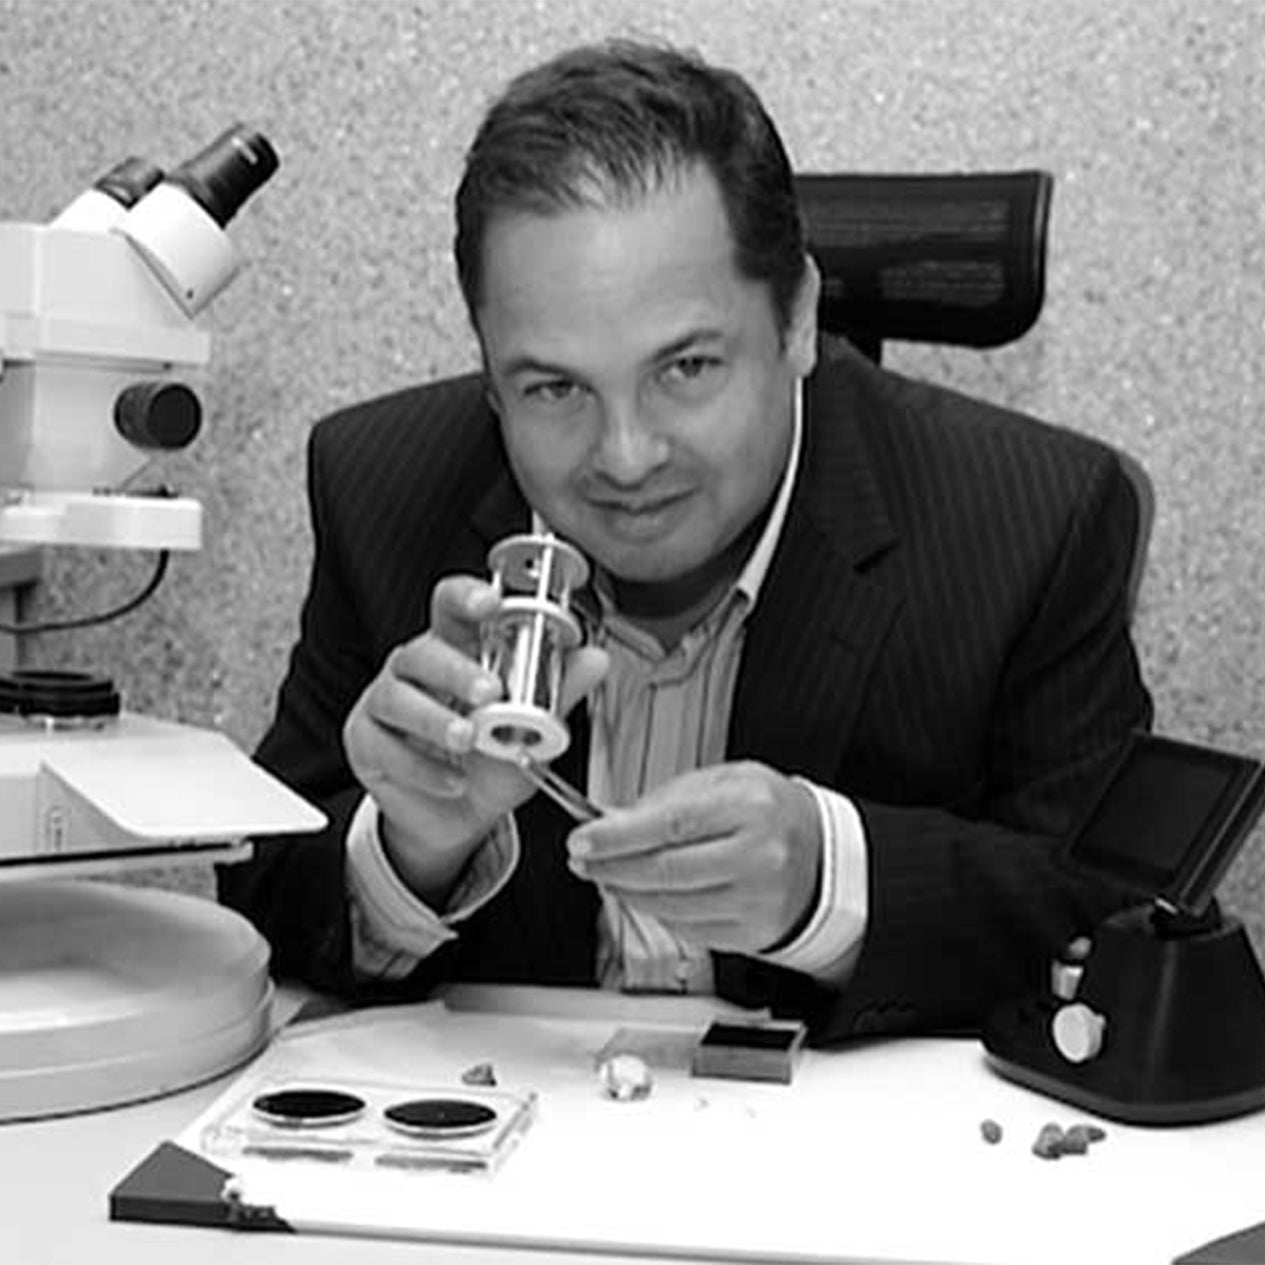 CEO Yair Shimansky happily inspecting diamonds at the jewellery store.